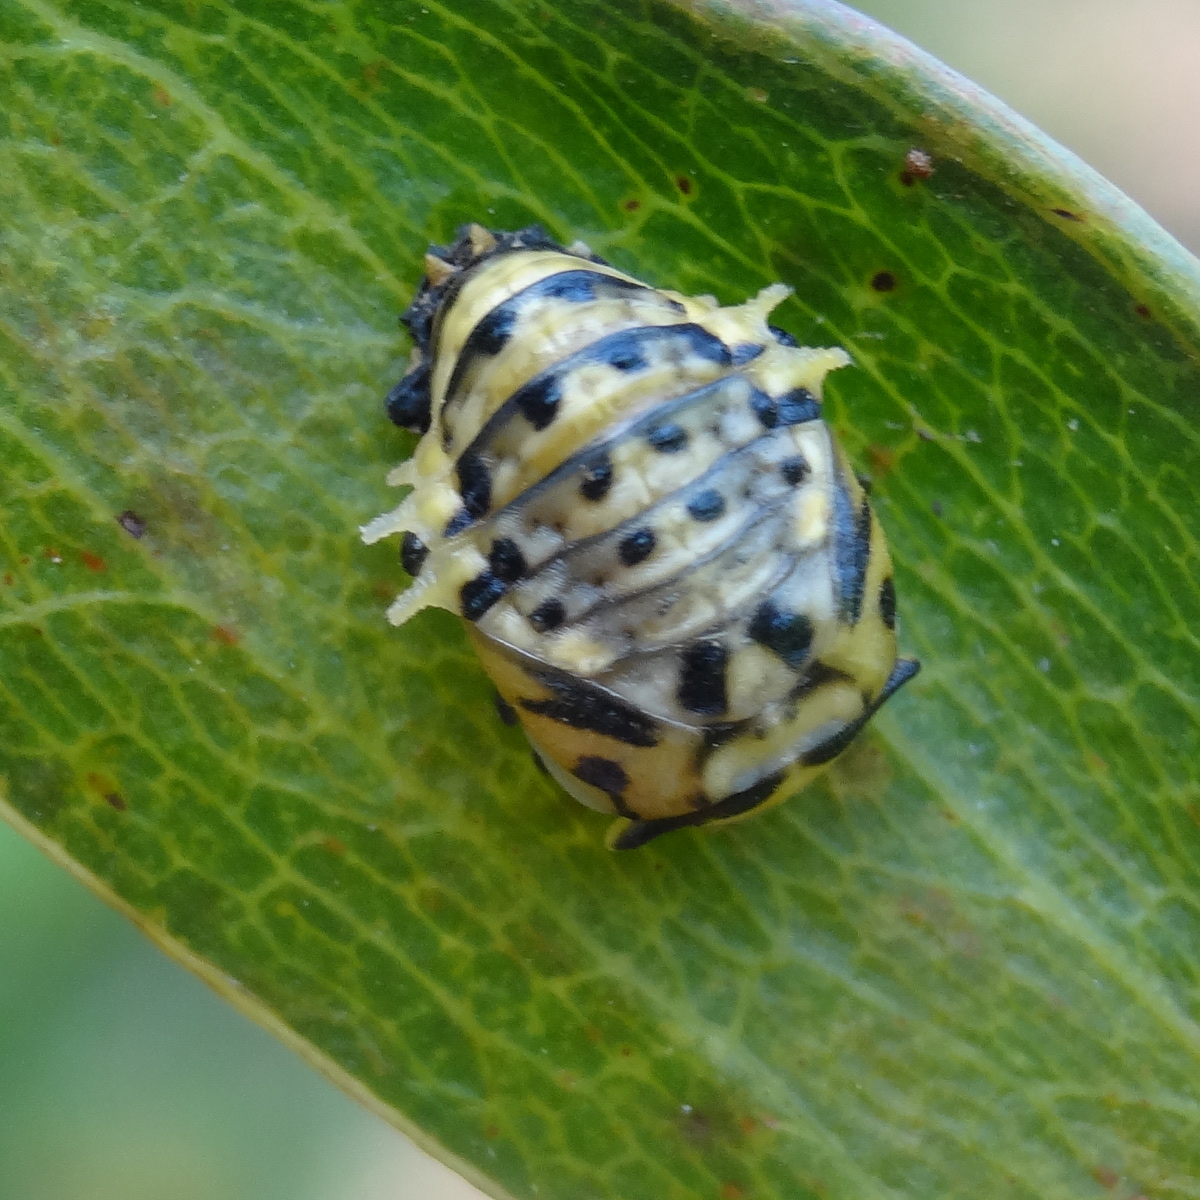 Coccinellidae pupa